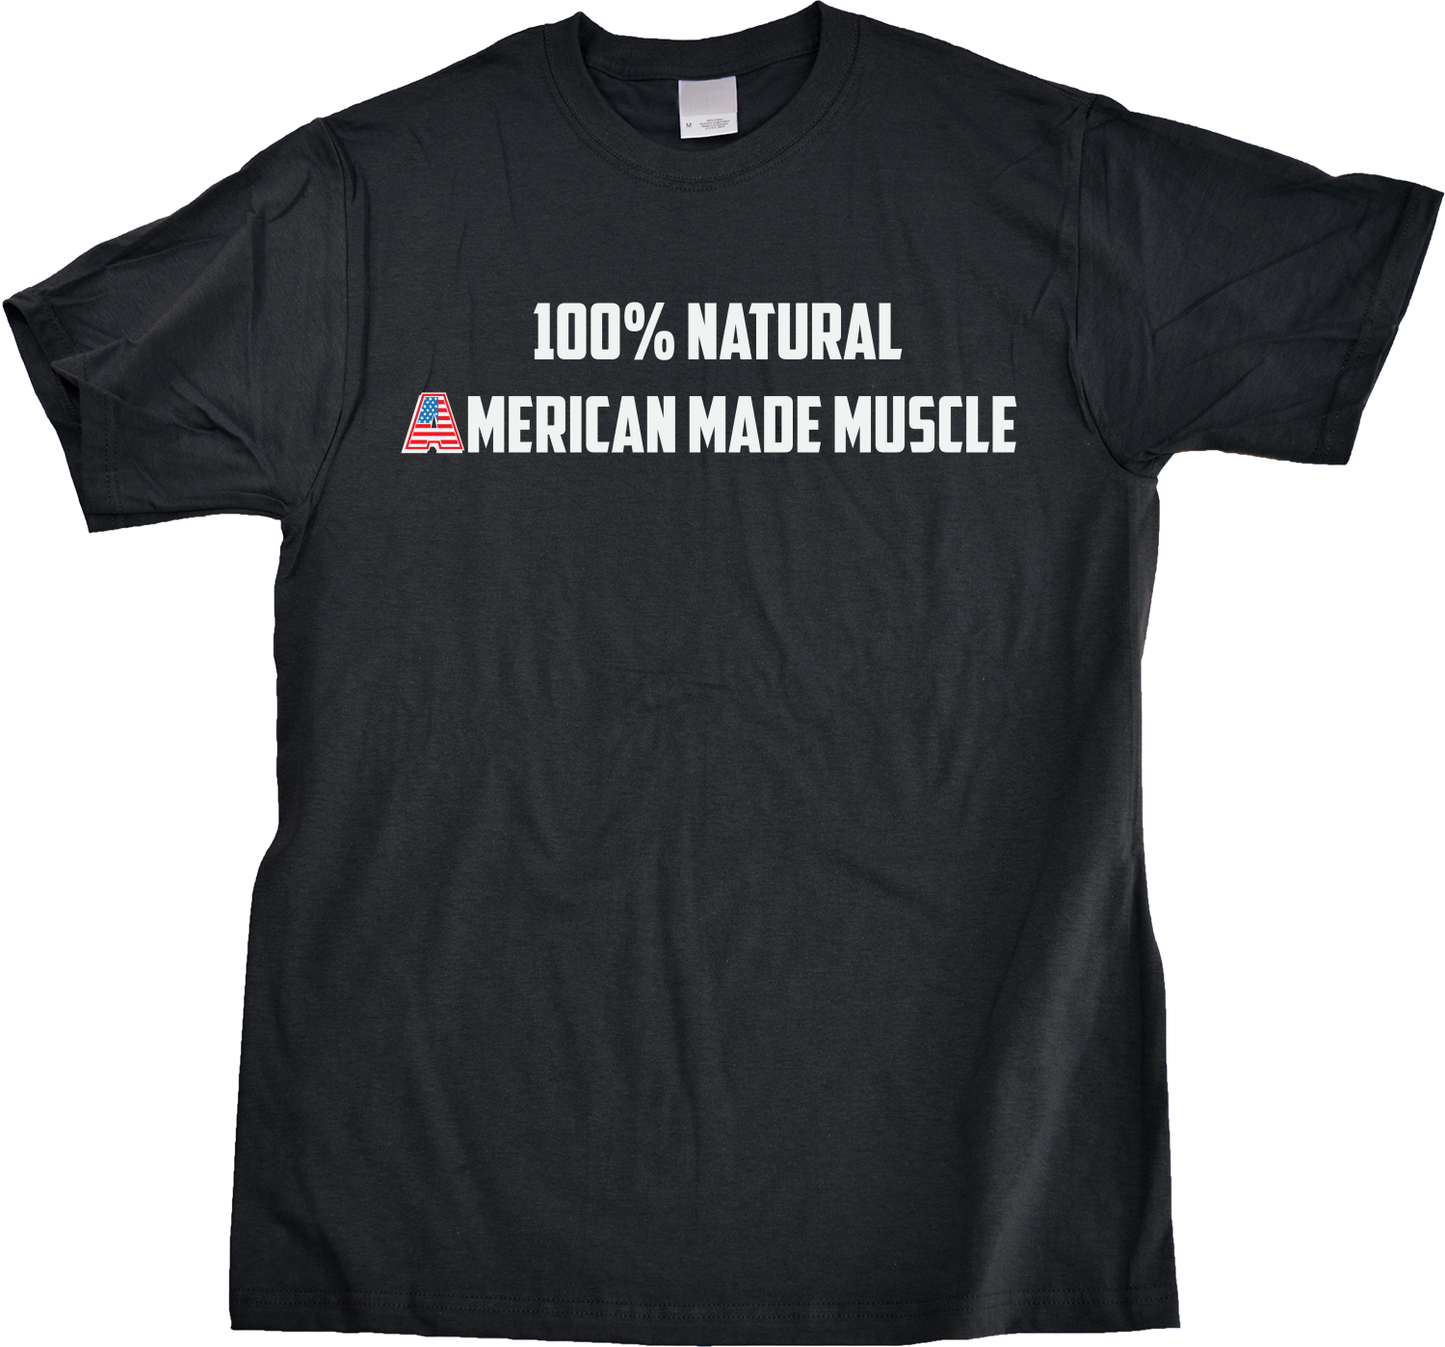 Unisex Black Natural American Muscle - Bodybuilding Weight Lifiting Pride Fan 